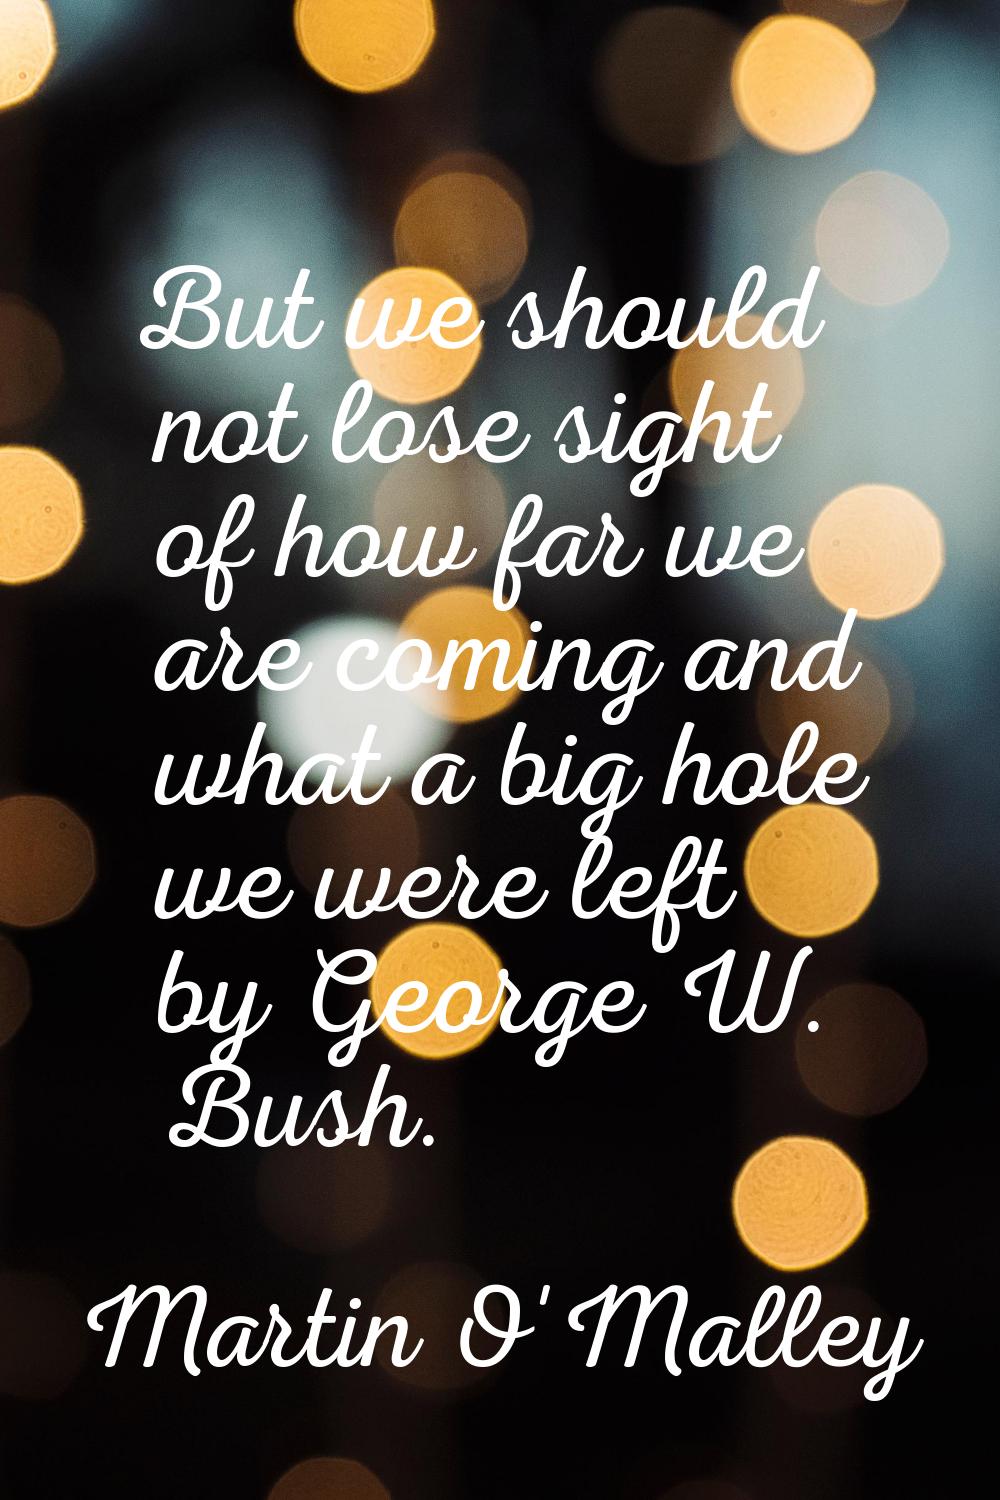 But we should not lose sight of how far we are coming and what a big hole we were left by George W.